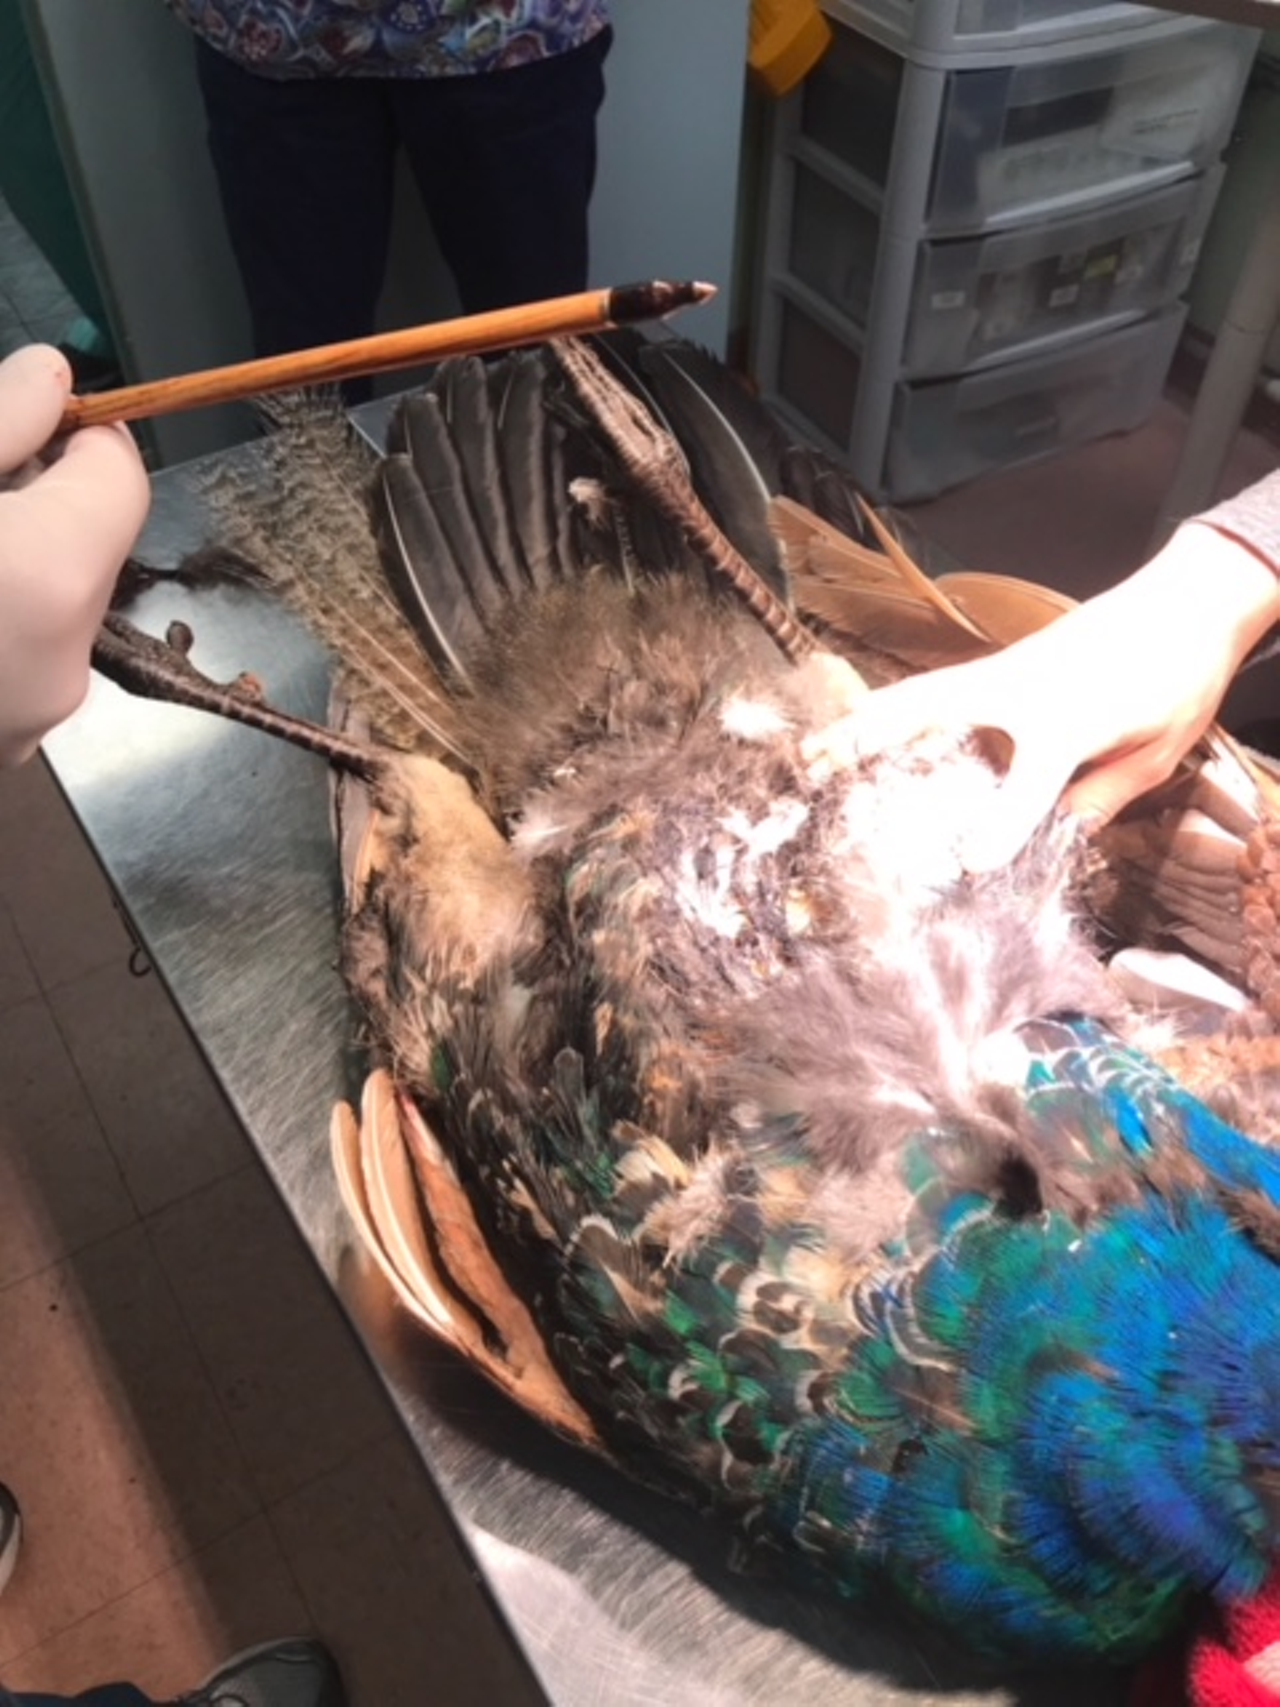 After removing the arrow, the staff at the clinic shows the arrow's size in comparison to the peacock.